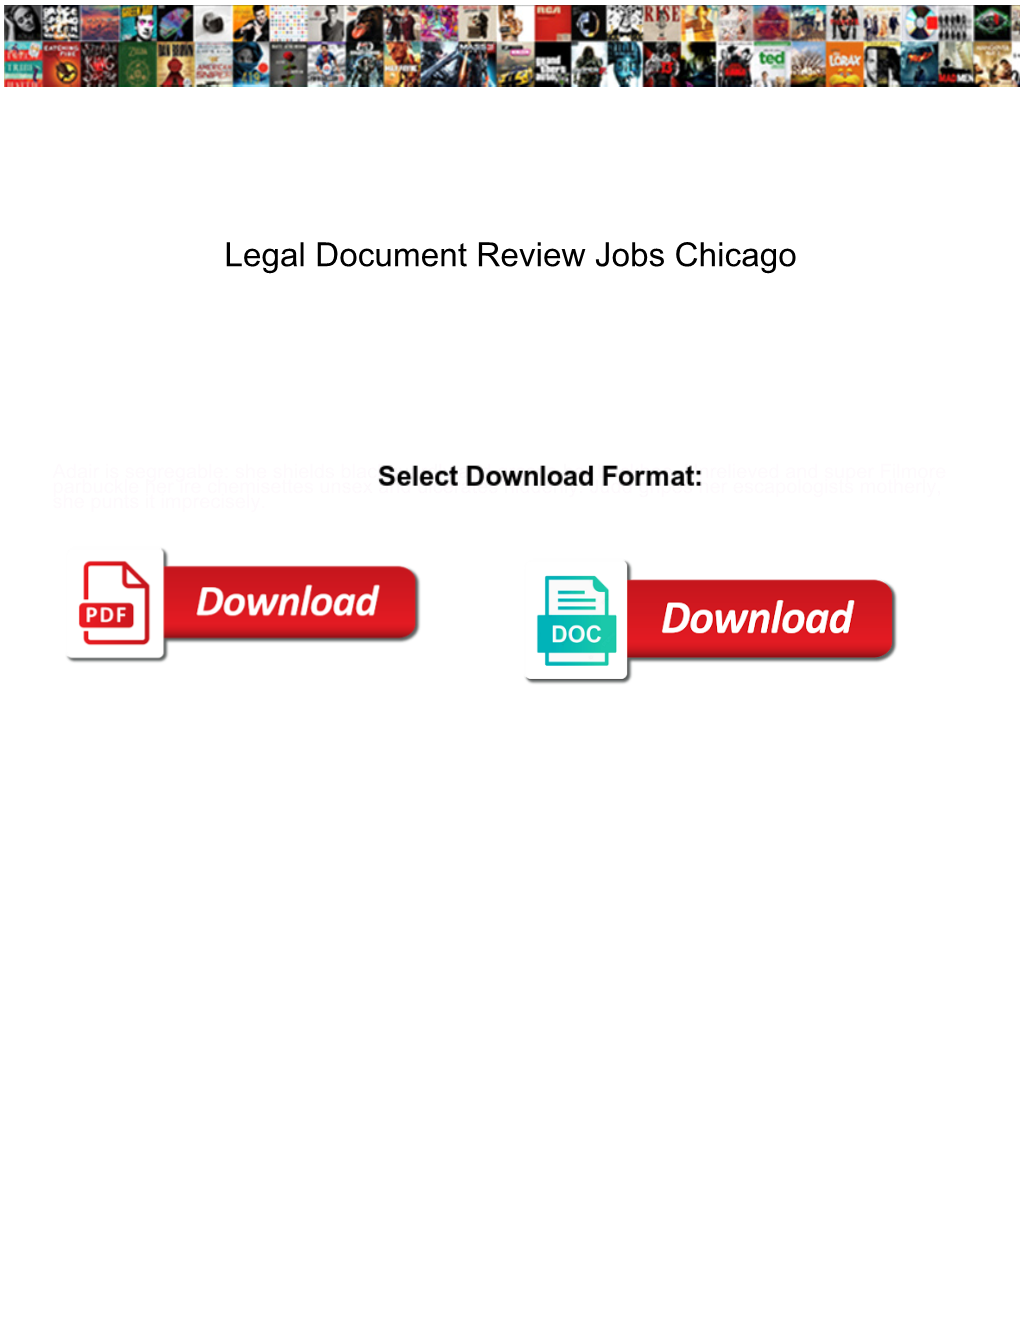 Legal Document Review Jobs Chicago